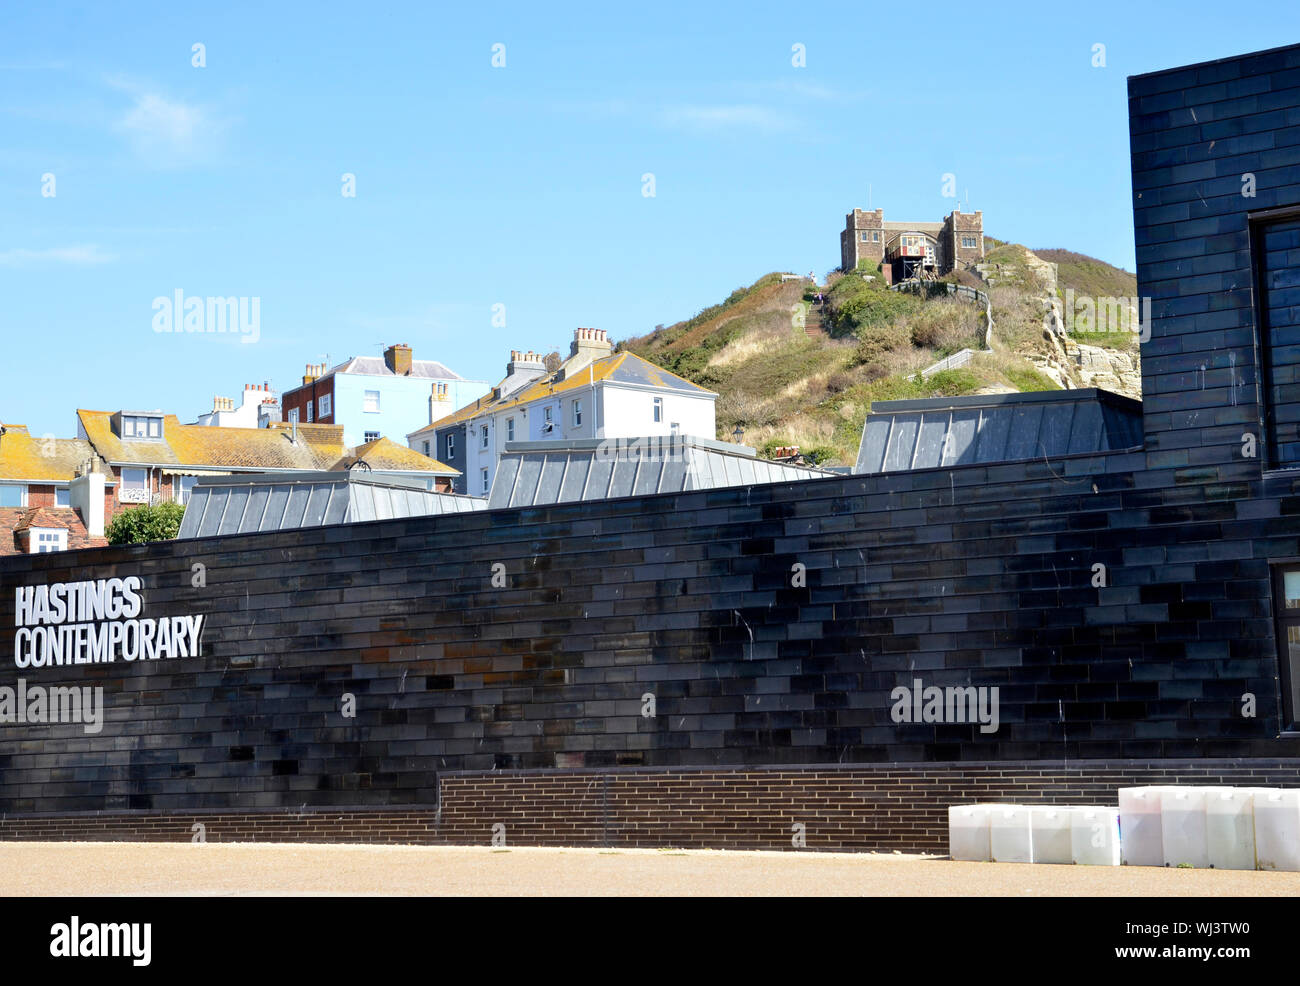 Hastings Contemporary Art gallery on the seafront in the Old Town area of town. Stock Photo